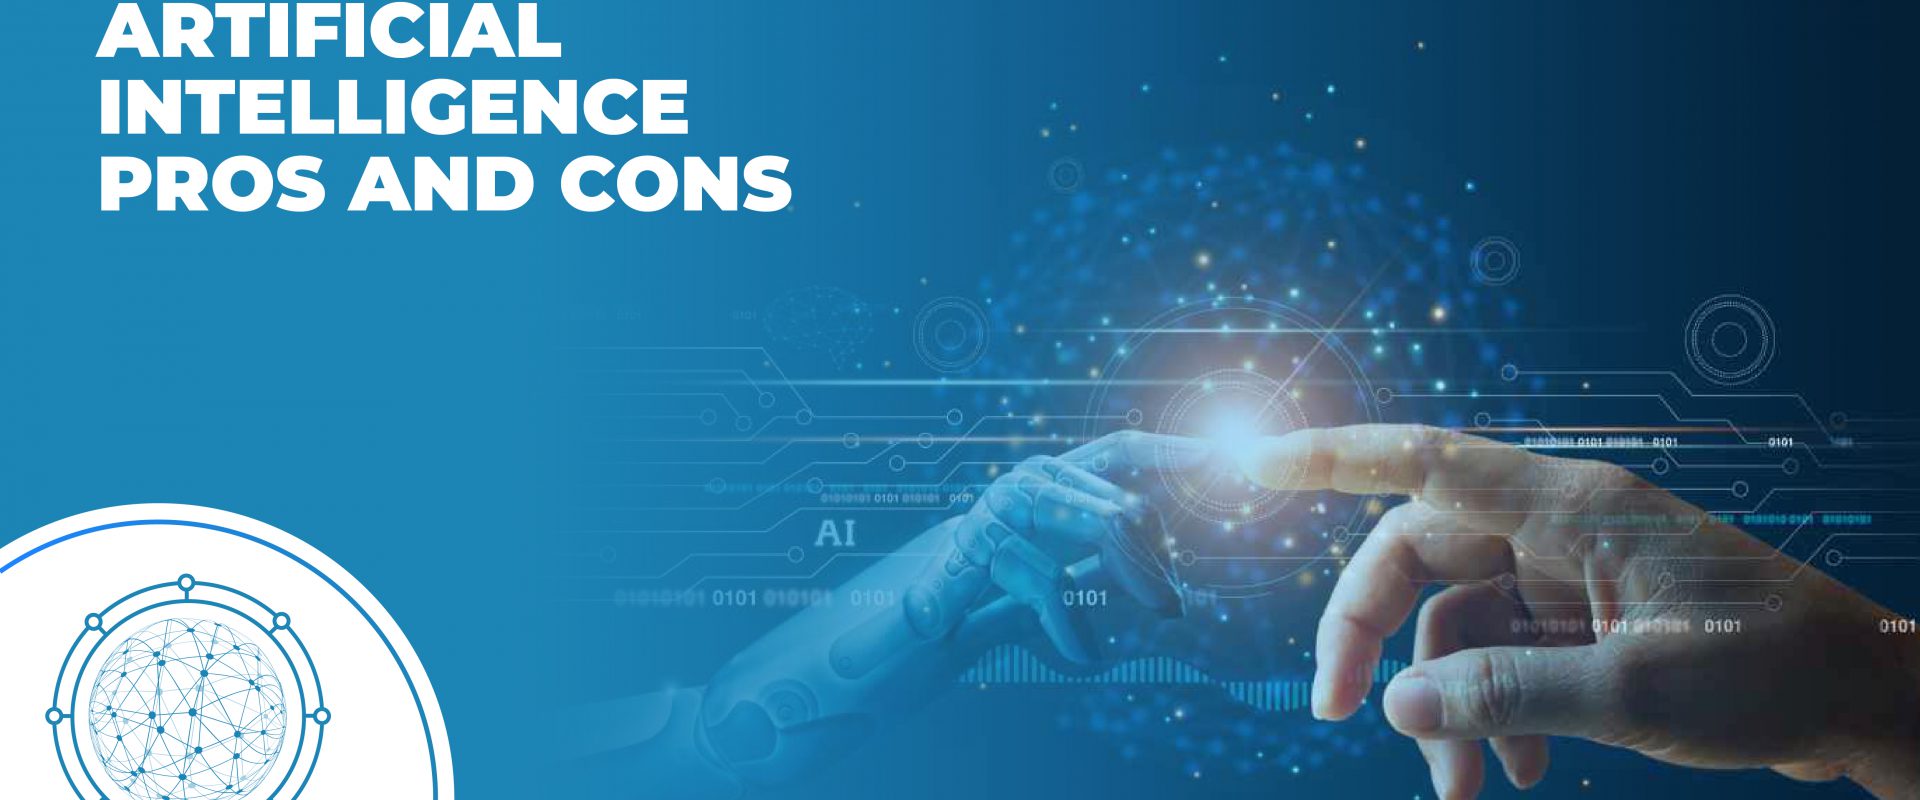 Artificial intelligence pros and cons